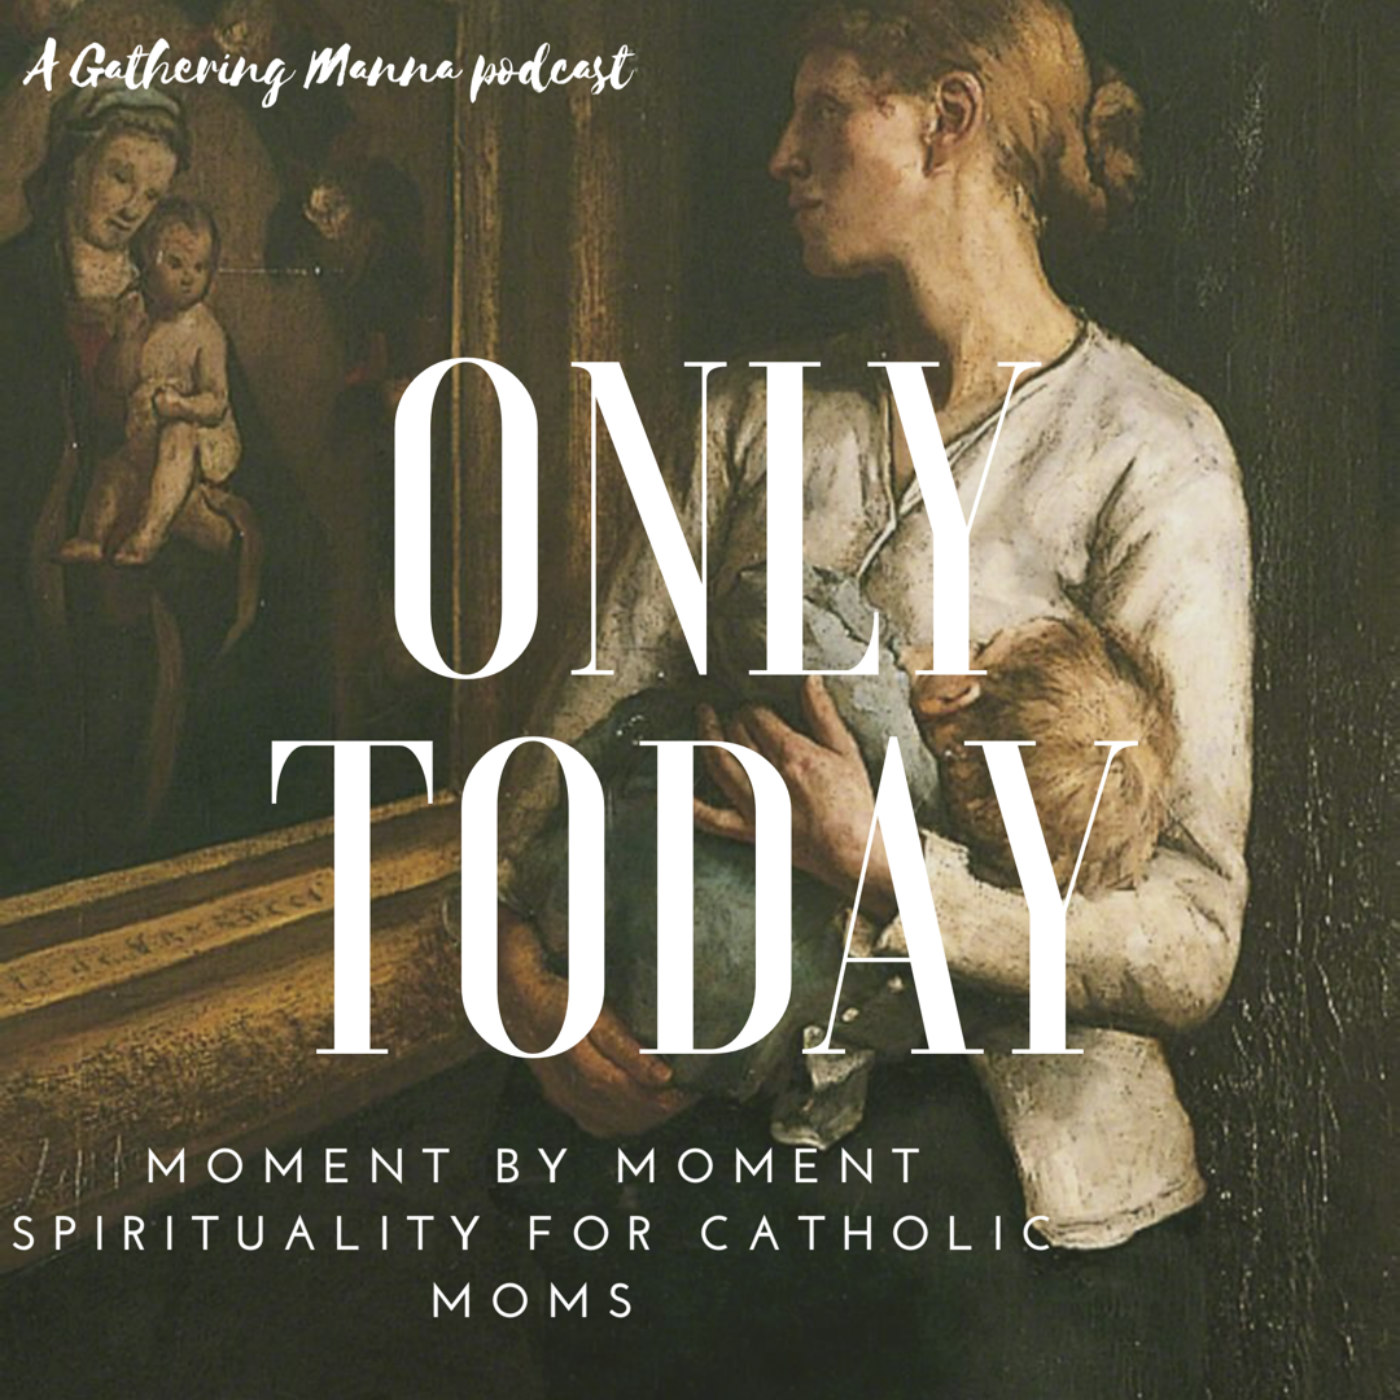 Pray with Me: Transforming Prayers for Catholic Moms pt.6: "The Litany of Humility" (Talk #3 of 3)